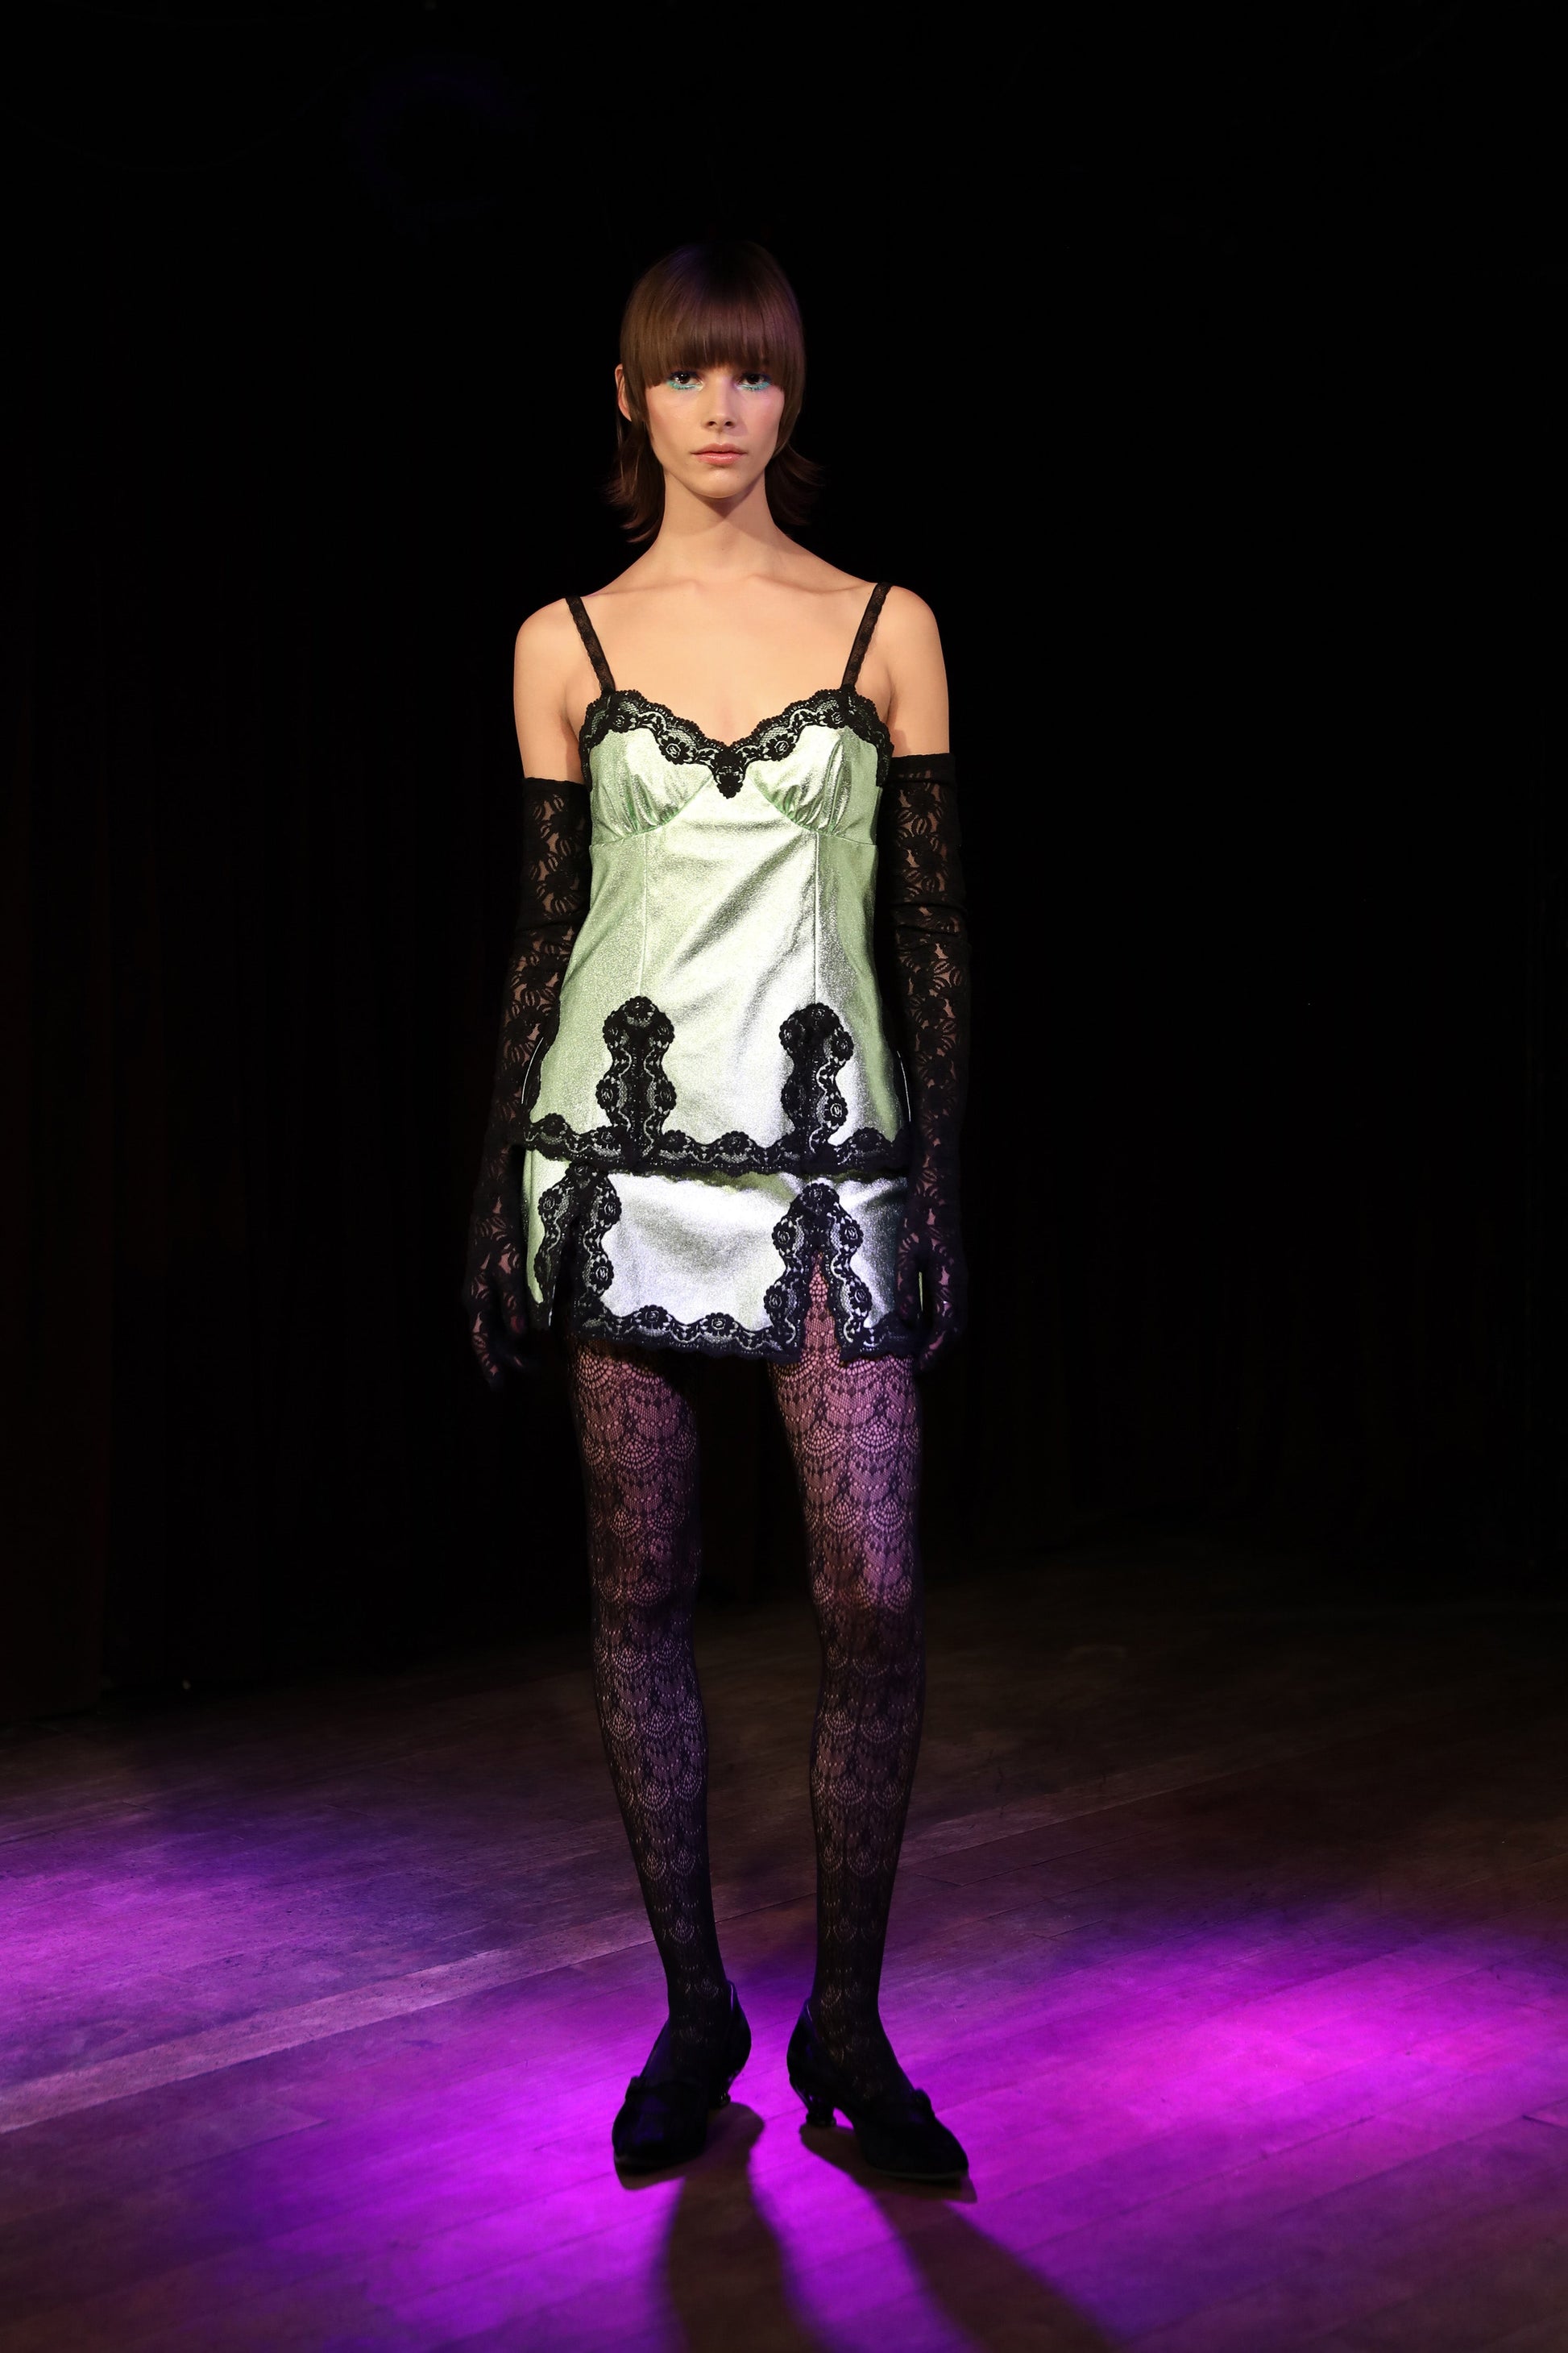 Runway lit for this fashion Anna Sui's Metallic Faux Leather Mini Skirt Peppermint, black lace hems